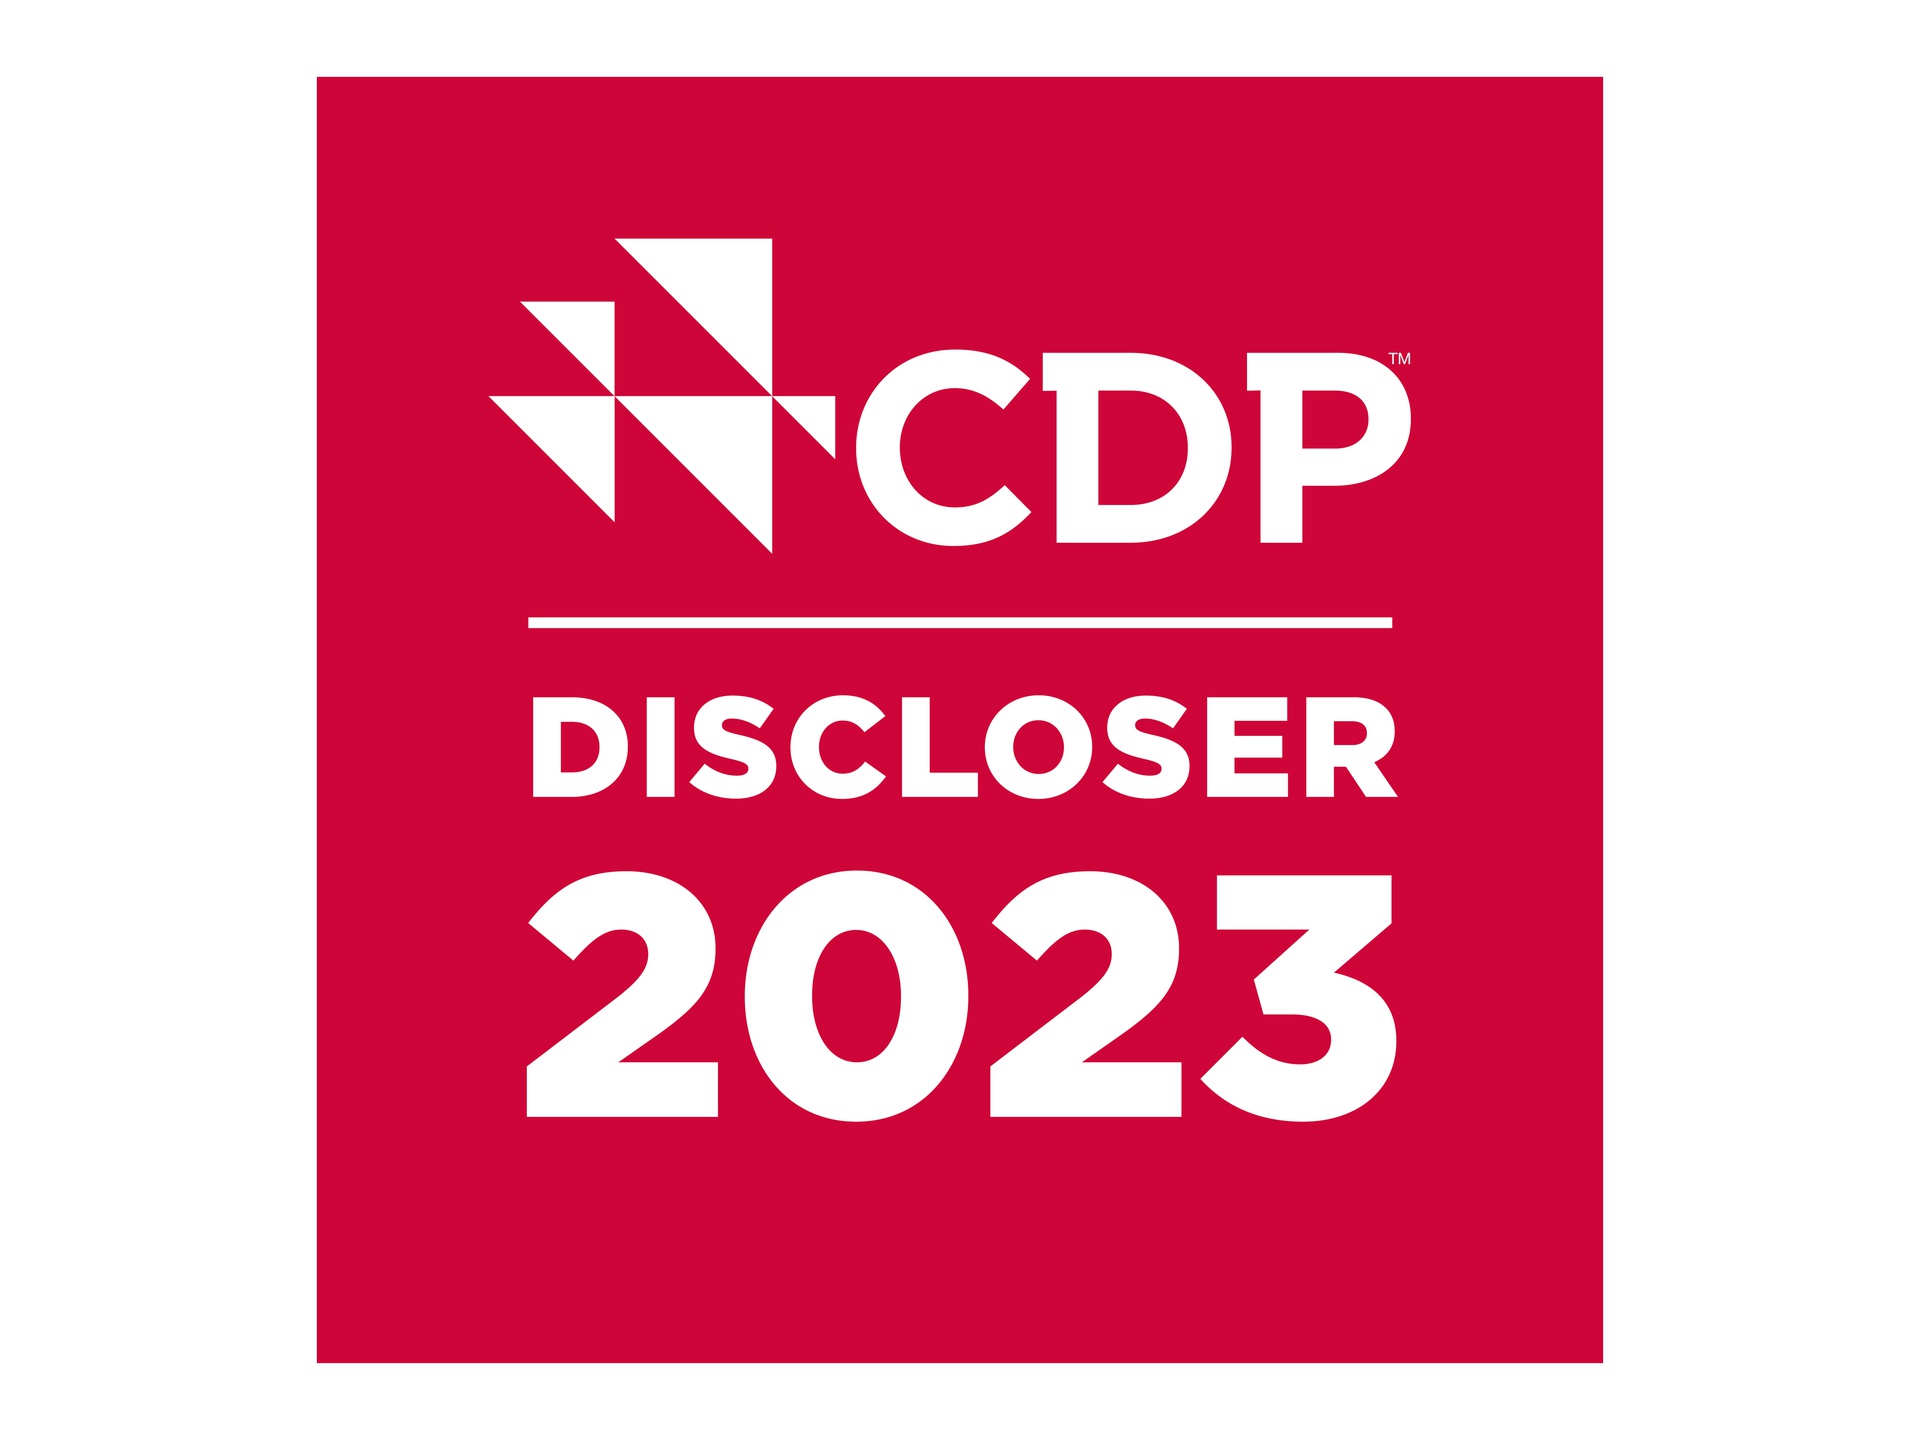 Diamond Packaging Embraces Environmental Transparency by Disclosing Through CDP